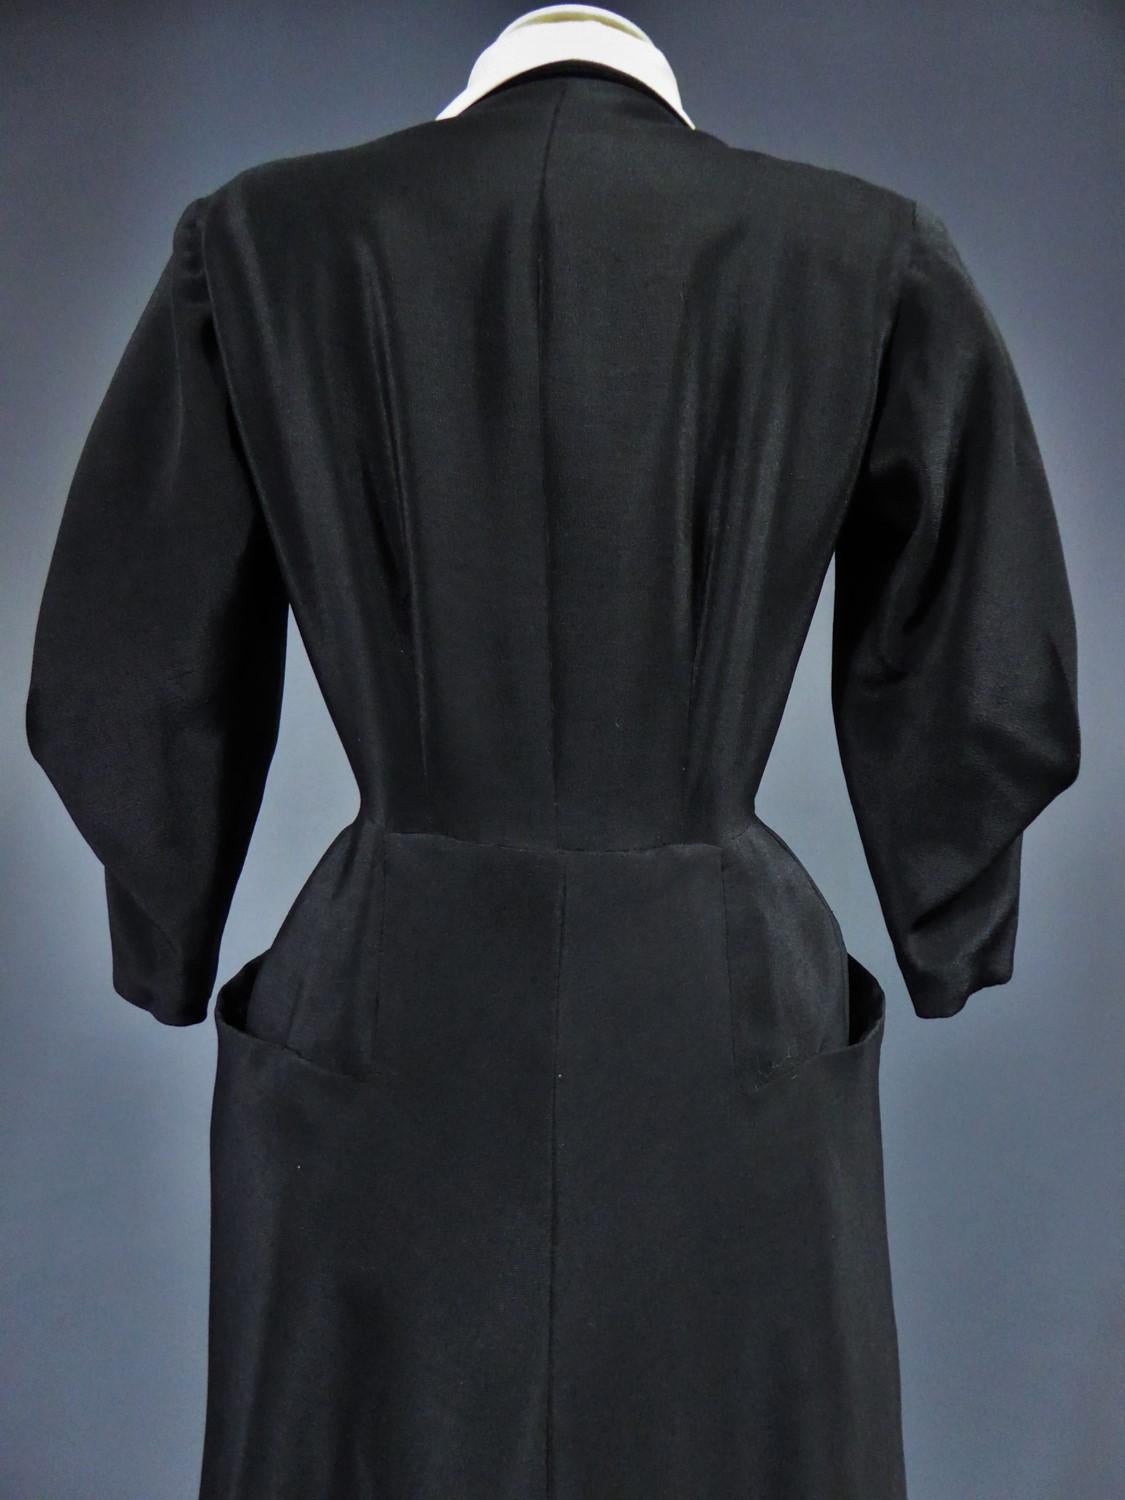 A Maggy Rouff French Couture Dinner Dress Circa 1950 10